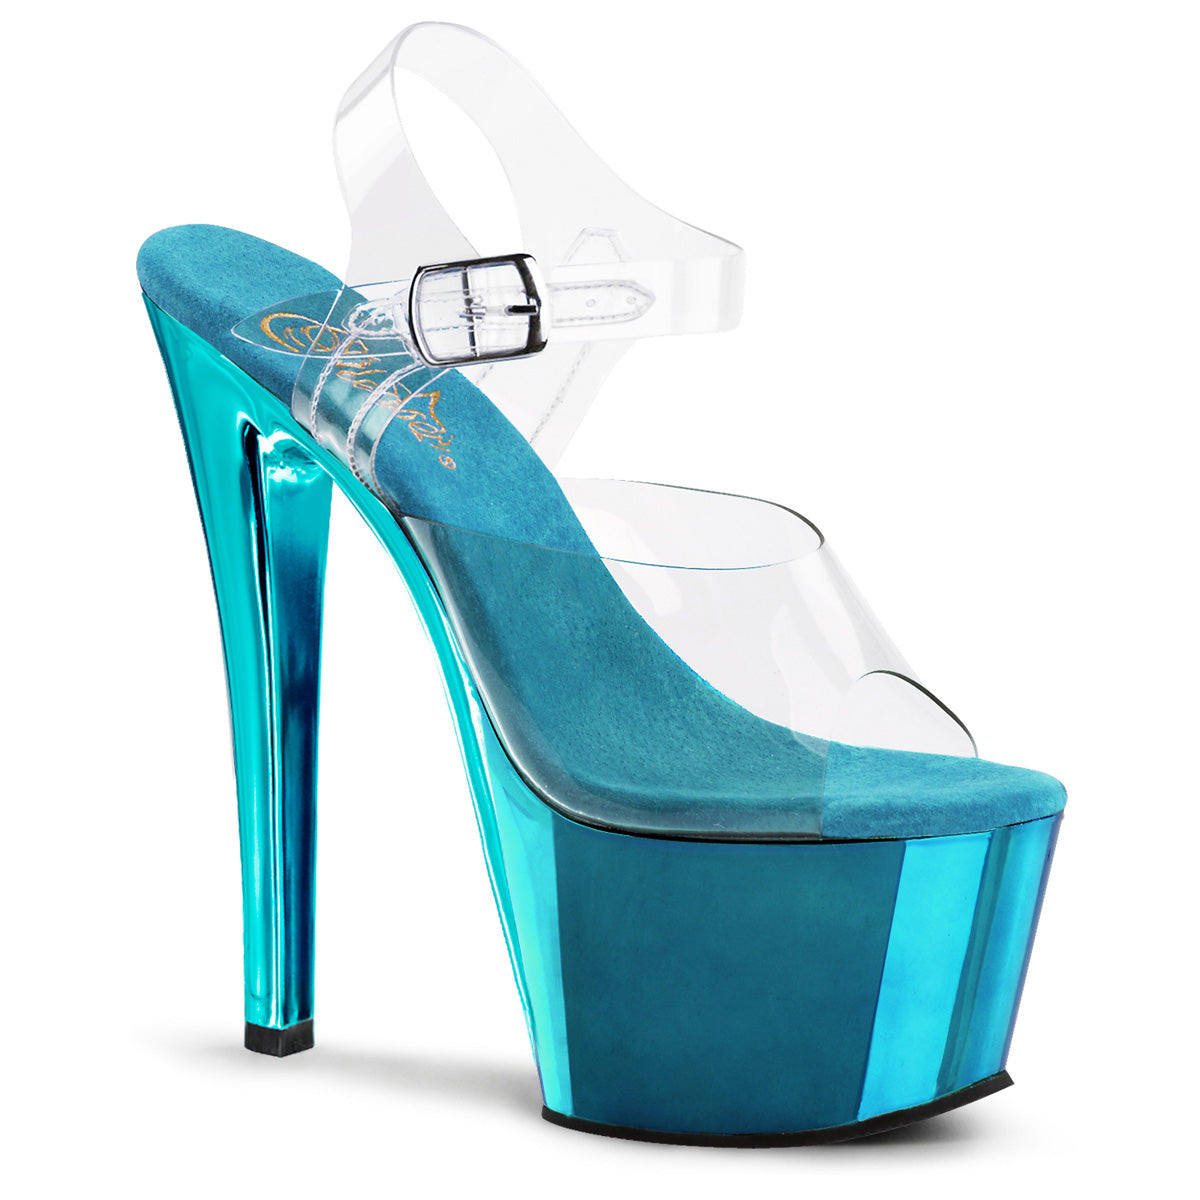 SKY-308 Sexy Shoes 7 Inch Clear and Turquoise Chrome Pole Dance Platforms